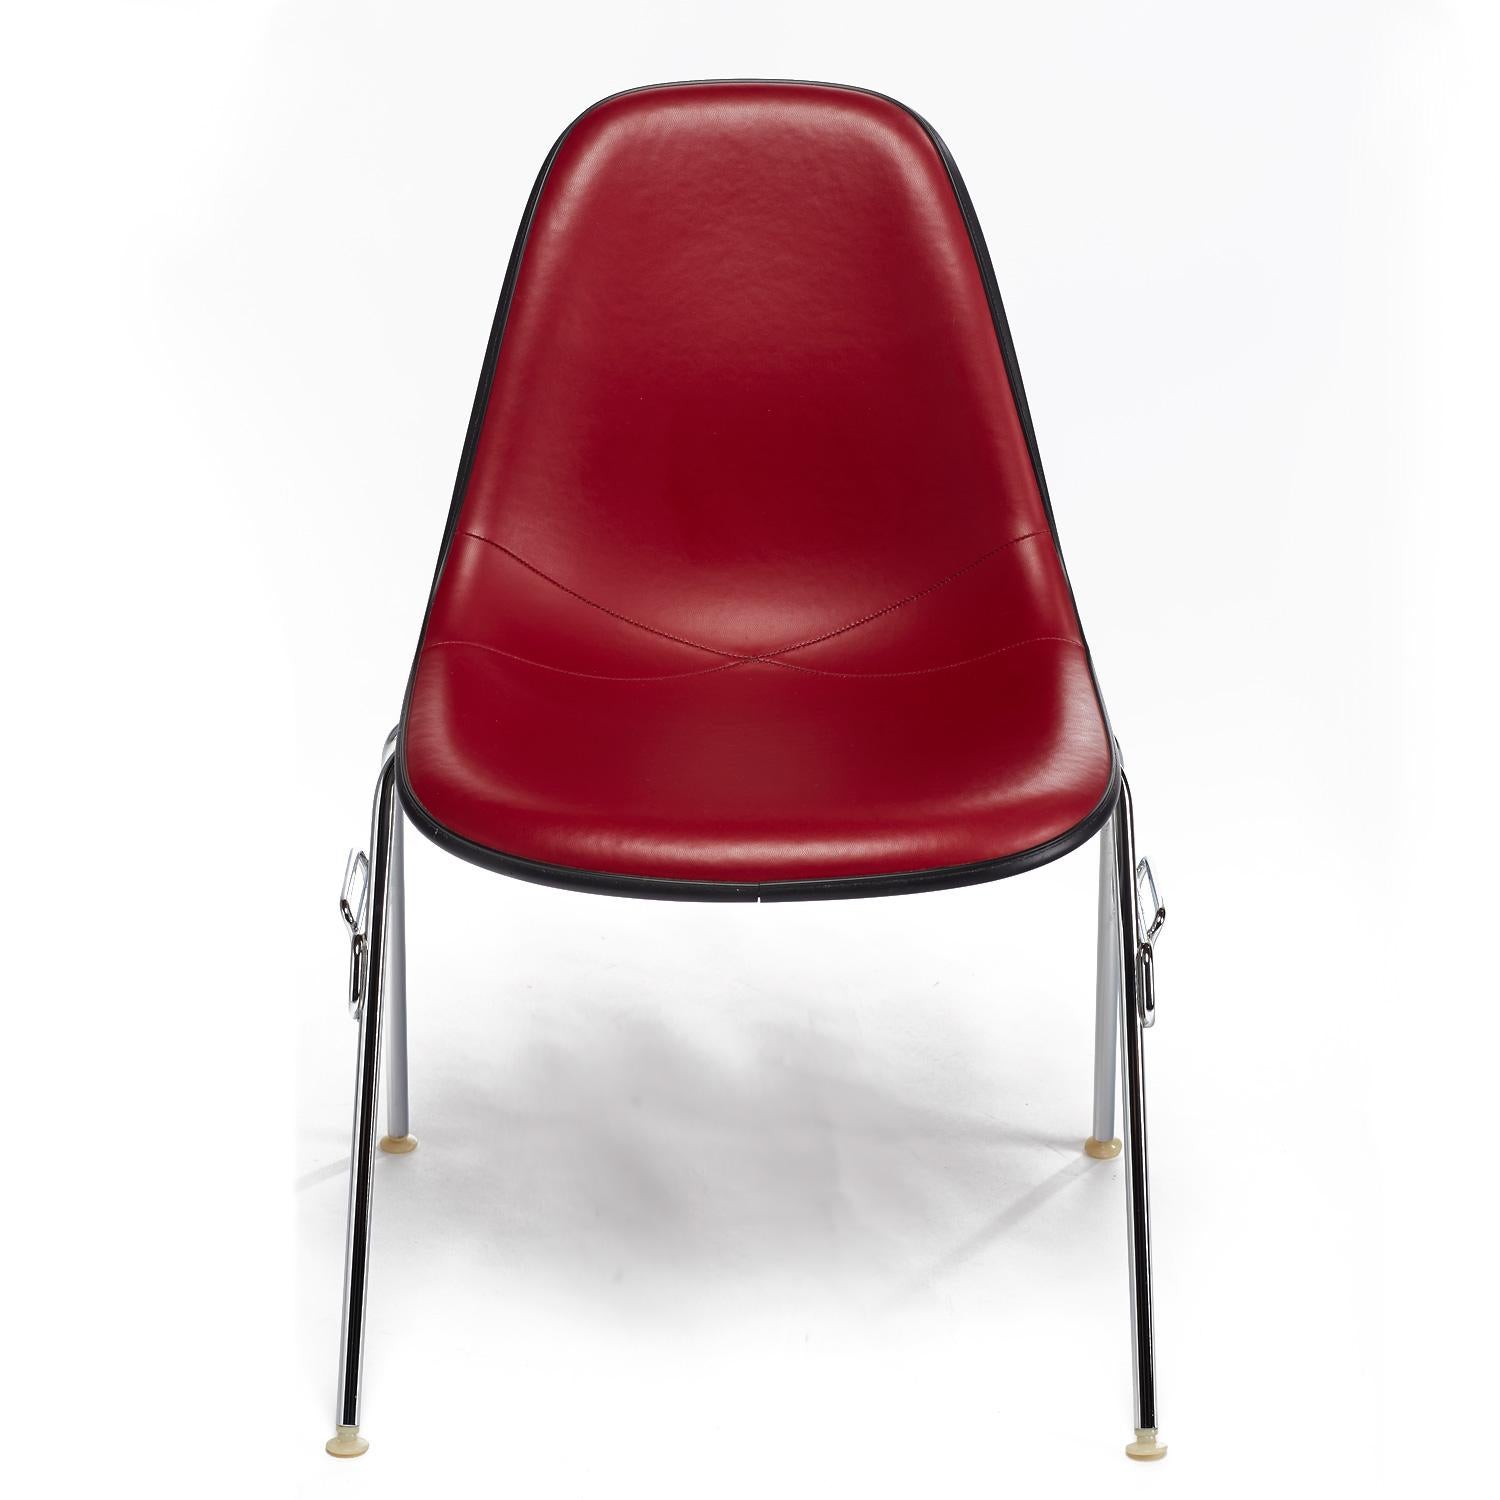 Metal Eames Red Padded Vinyl Molded Fiberglass Shell Chairs by Herman Miller, 1980s